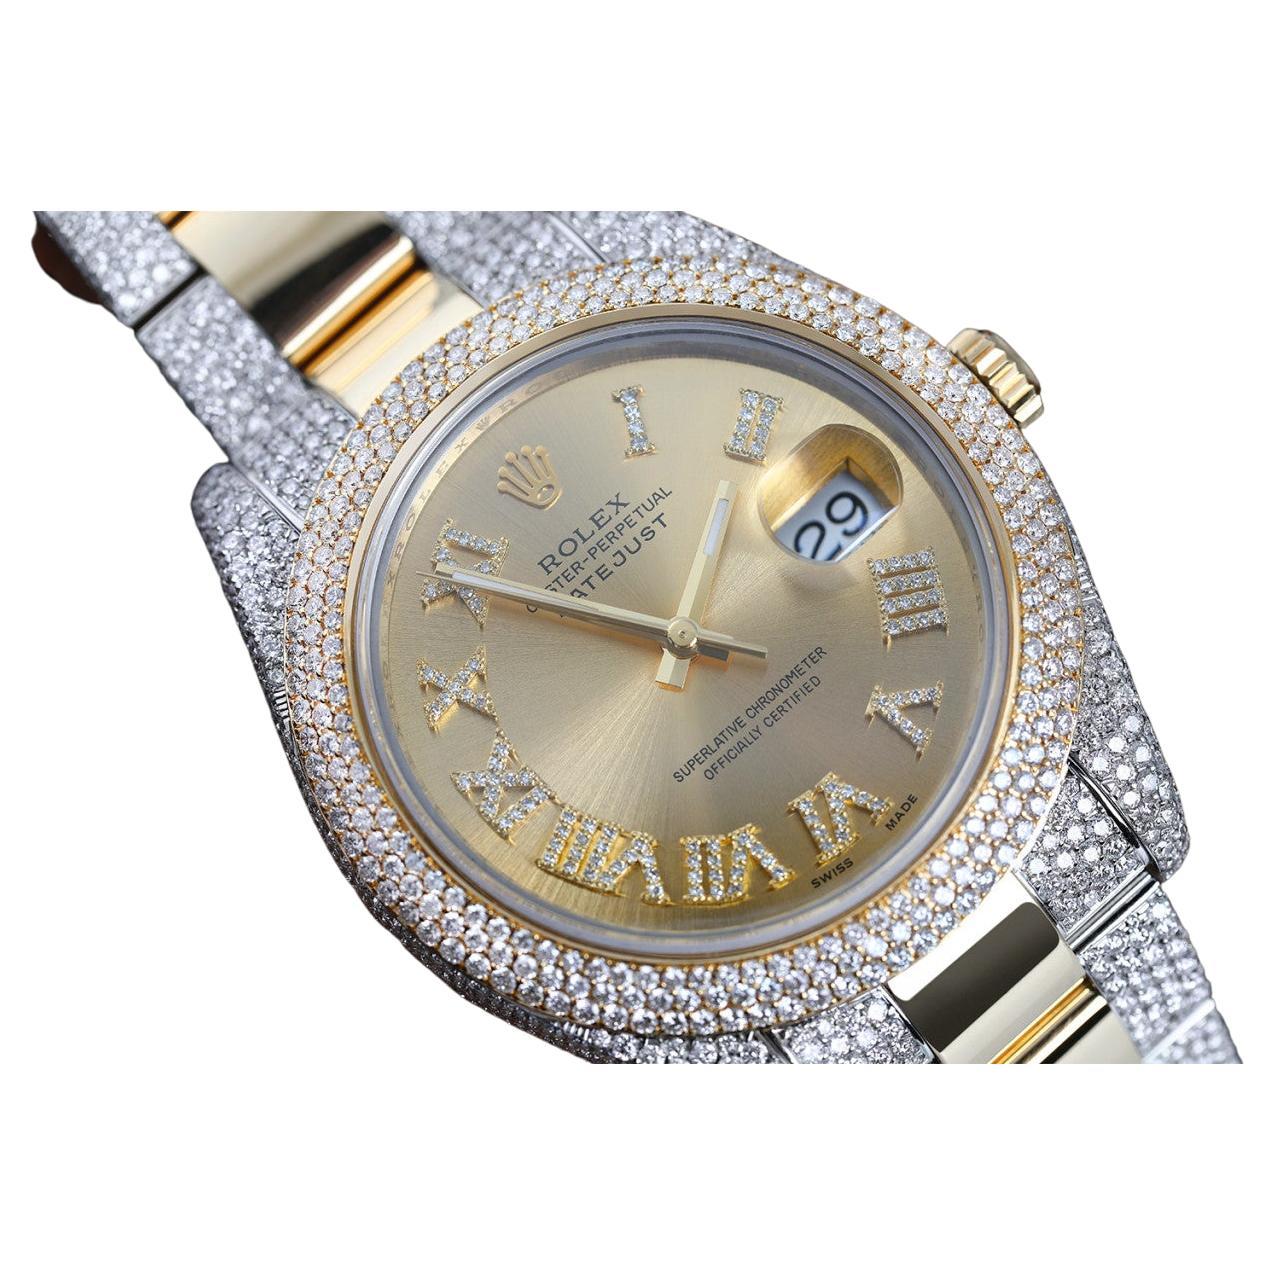 Rolex Datejust 41 Two Tone Iced Out Watch with Champagne Diamond Roman Numerals 